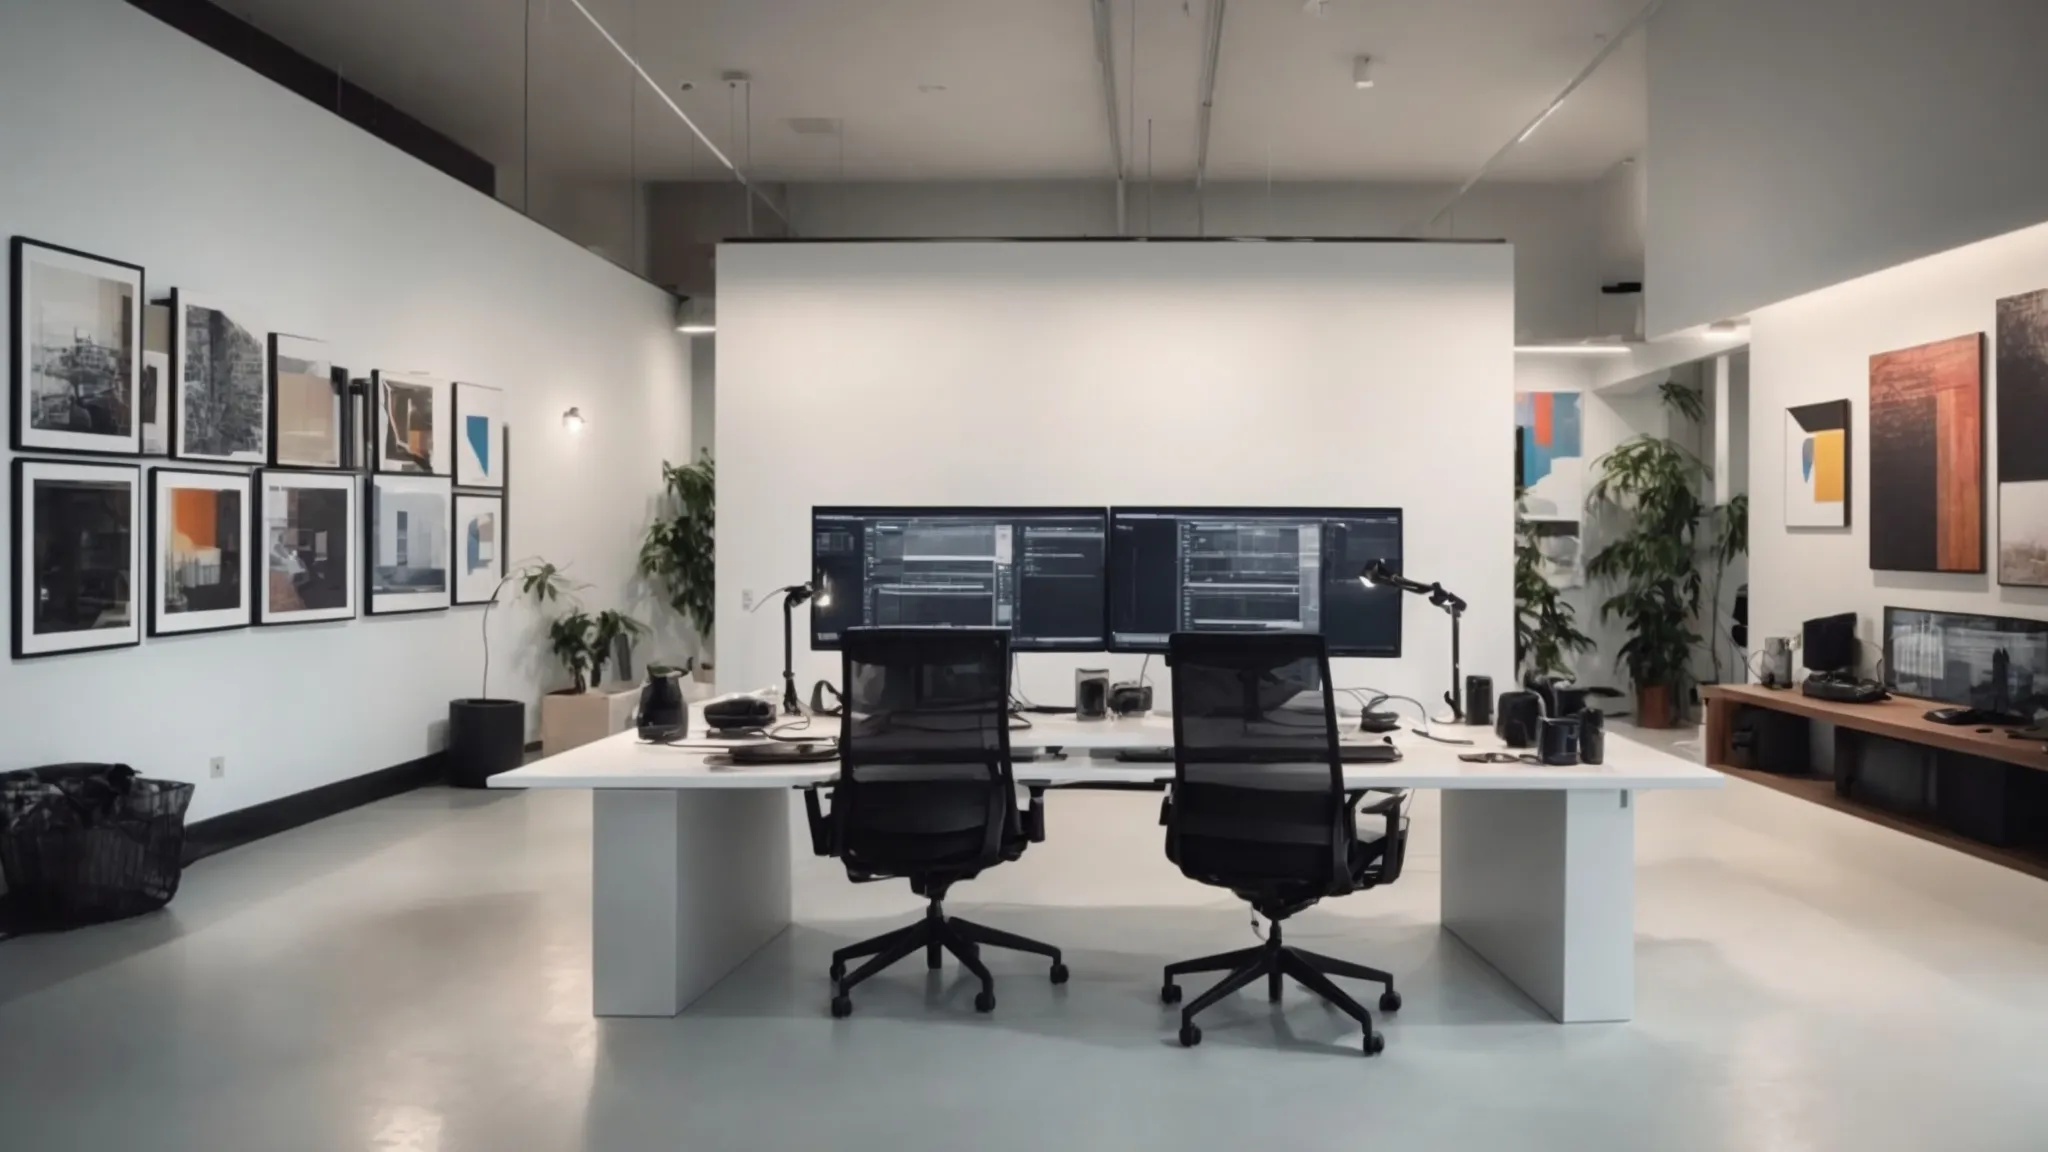 a spacious, well-lit room with a large, sleek desk harboring multiple monitors displaying various design software interfaces, surrounded by abstract art on the walls.